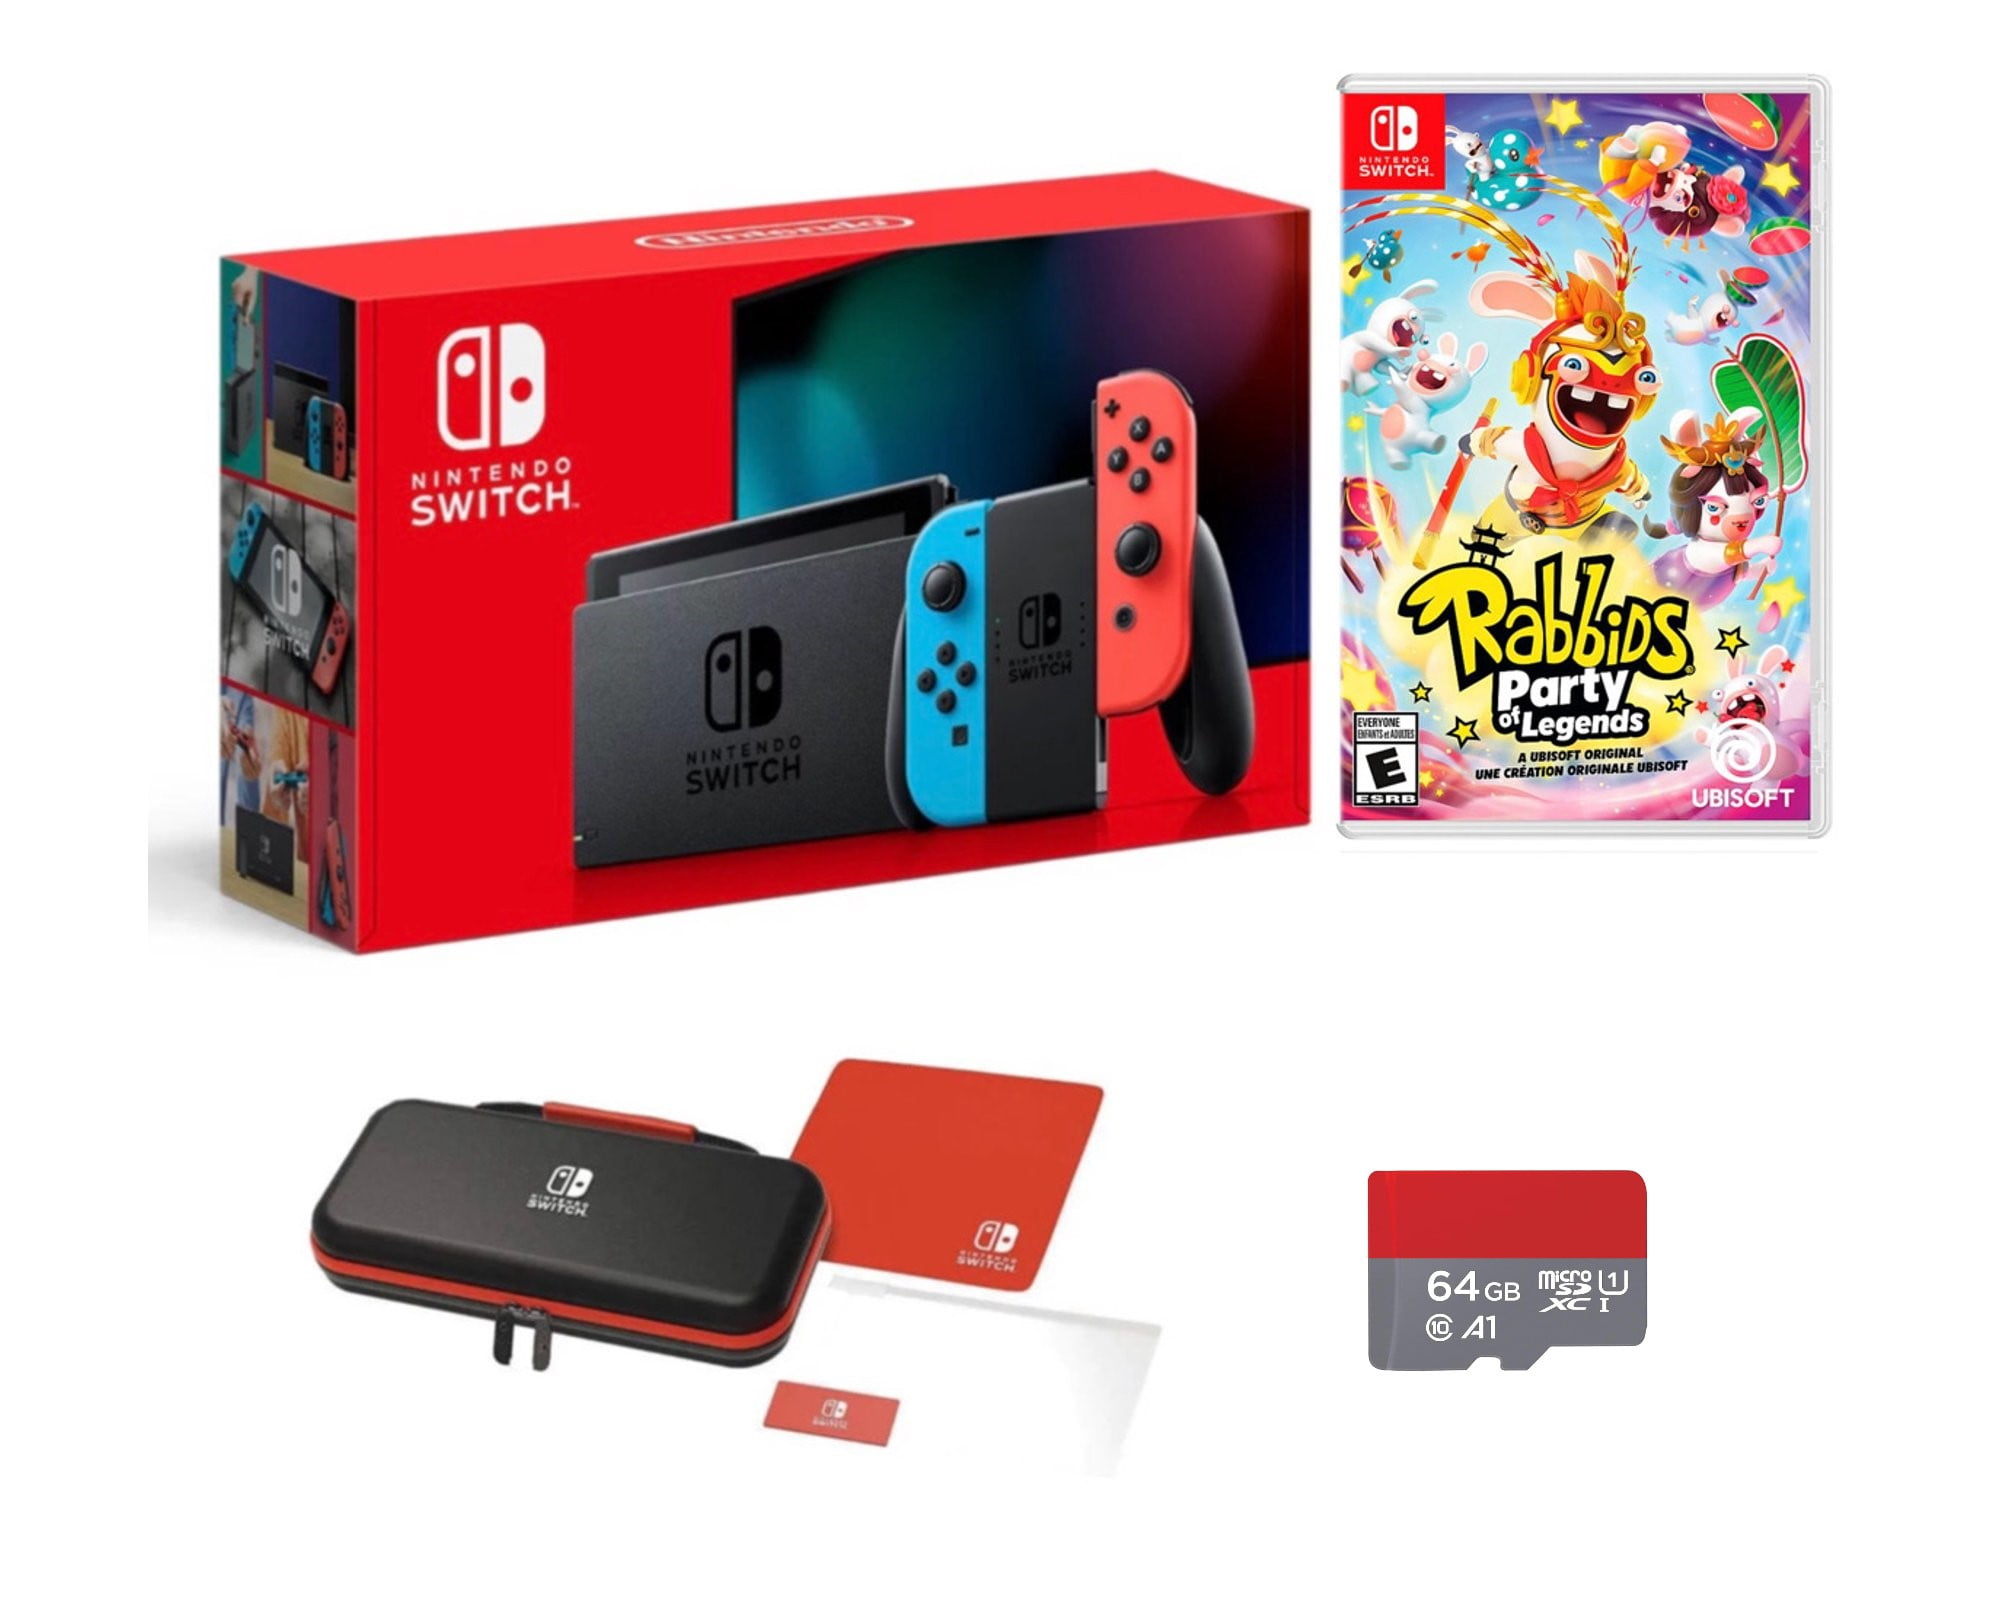 New Nintendo Switch Console with Neon Blue & Red Joy-Con - Bundle with Rabbids  Party of Legends - 64GB Micro SD Included- PowerA Case